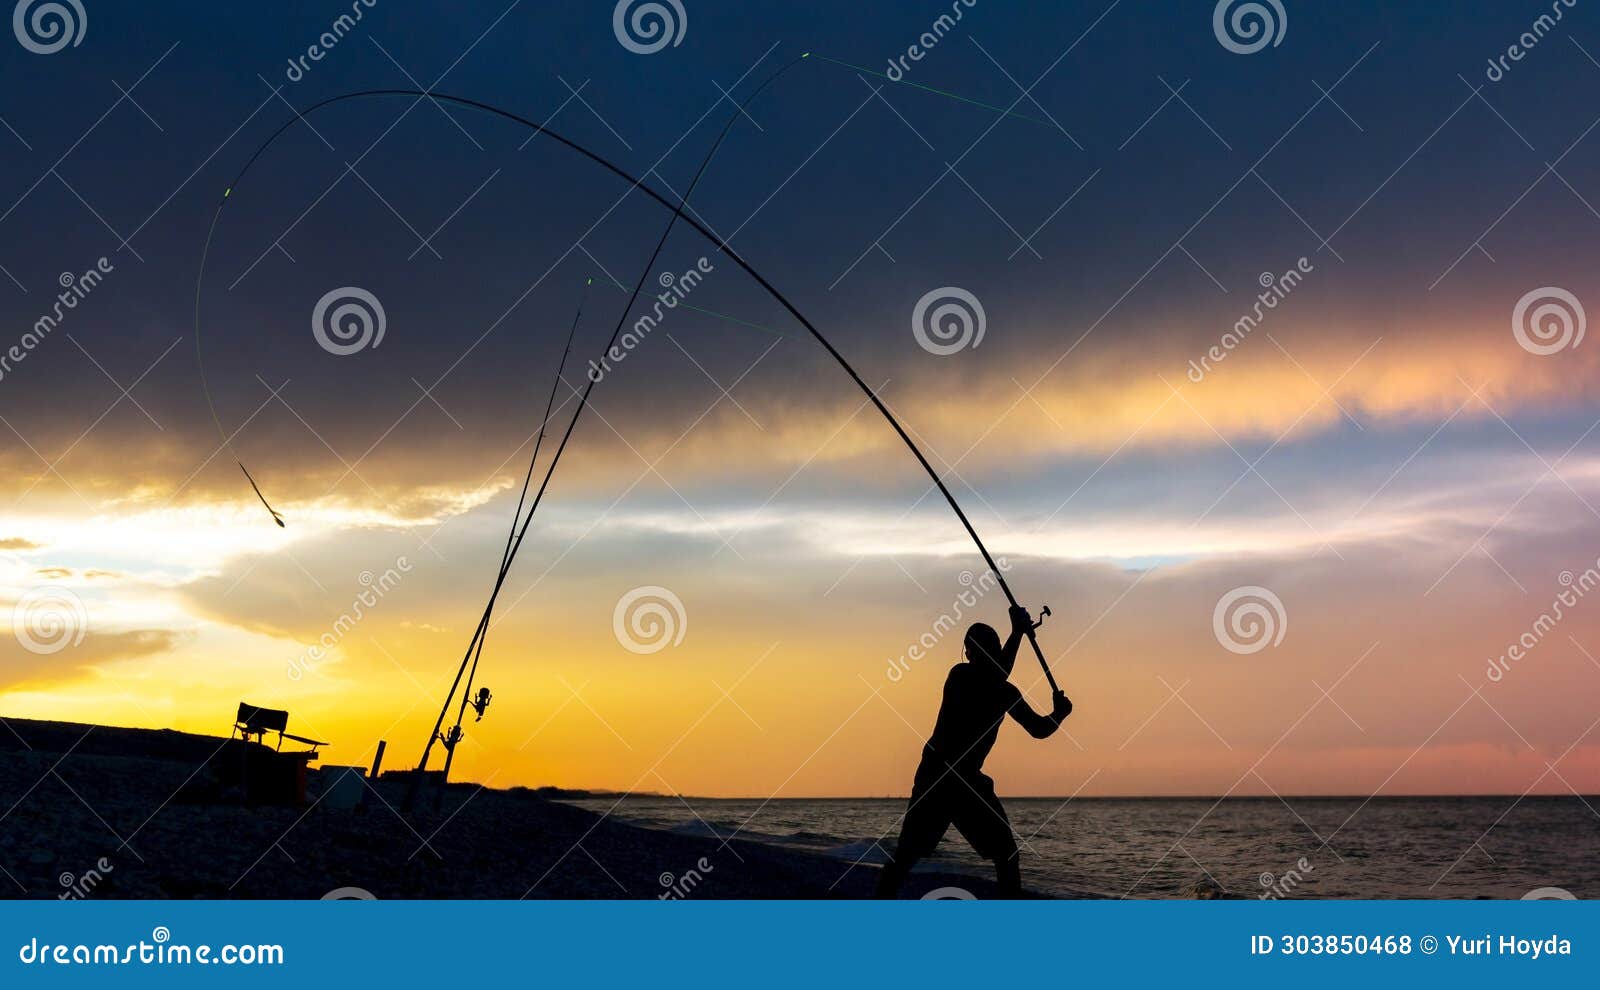 Fisherman Cast Fishing Rods on the Seashore at a Dramatic Sunset. Fisherman  Silhouette Stock Photo - Image of cast, fishes: 303850468